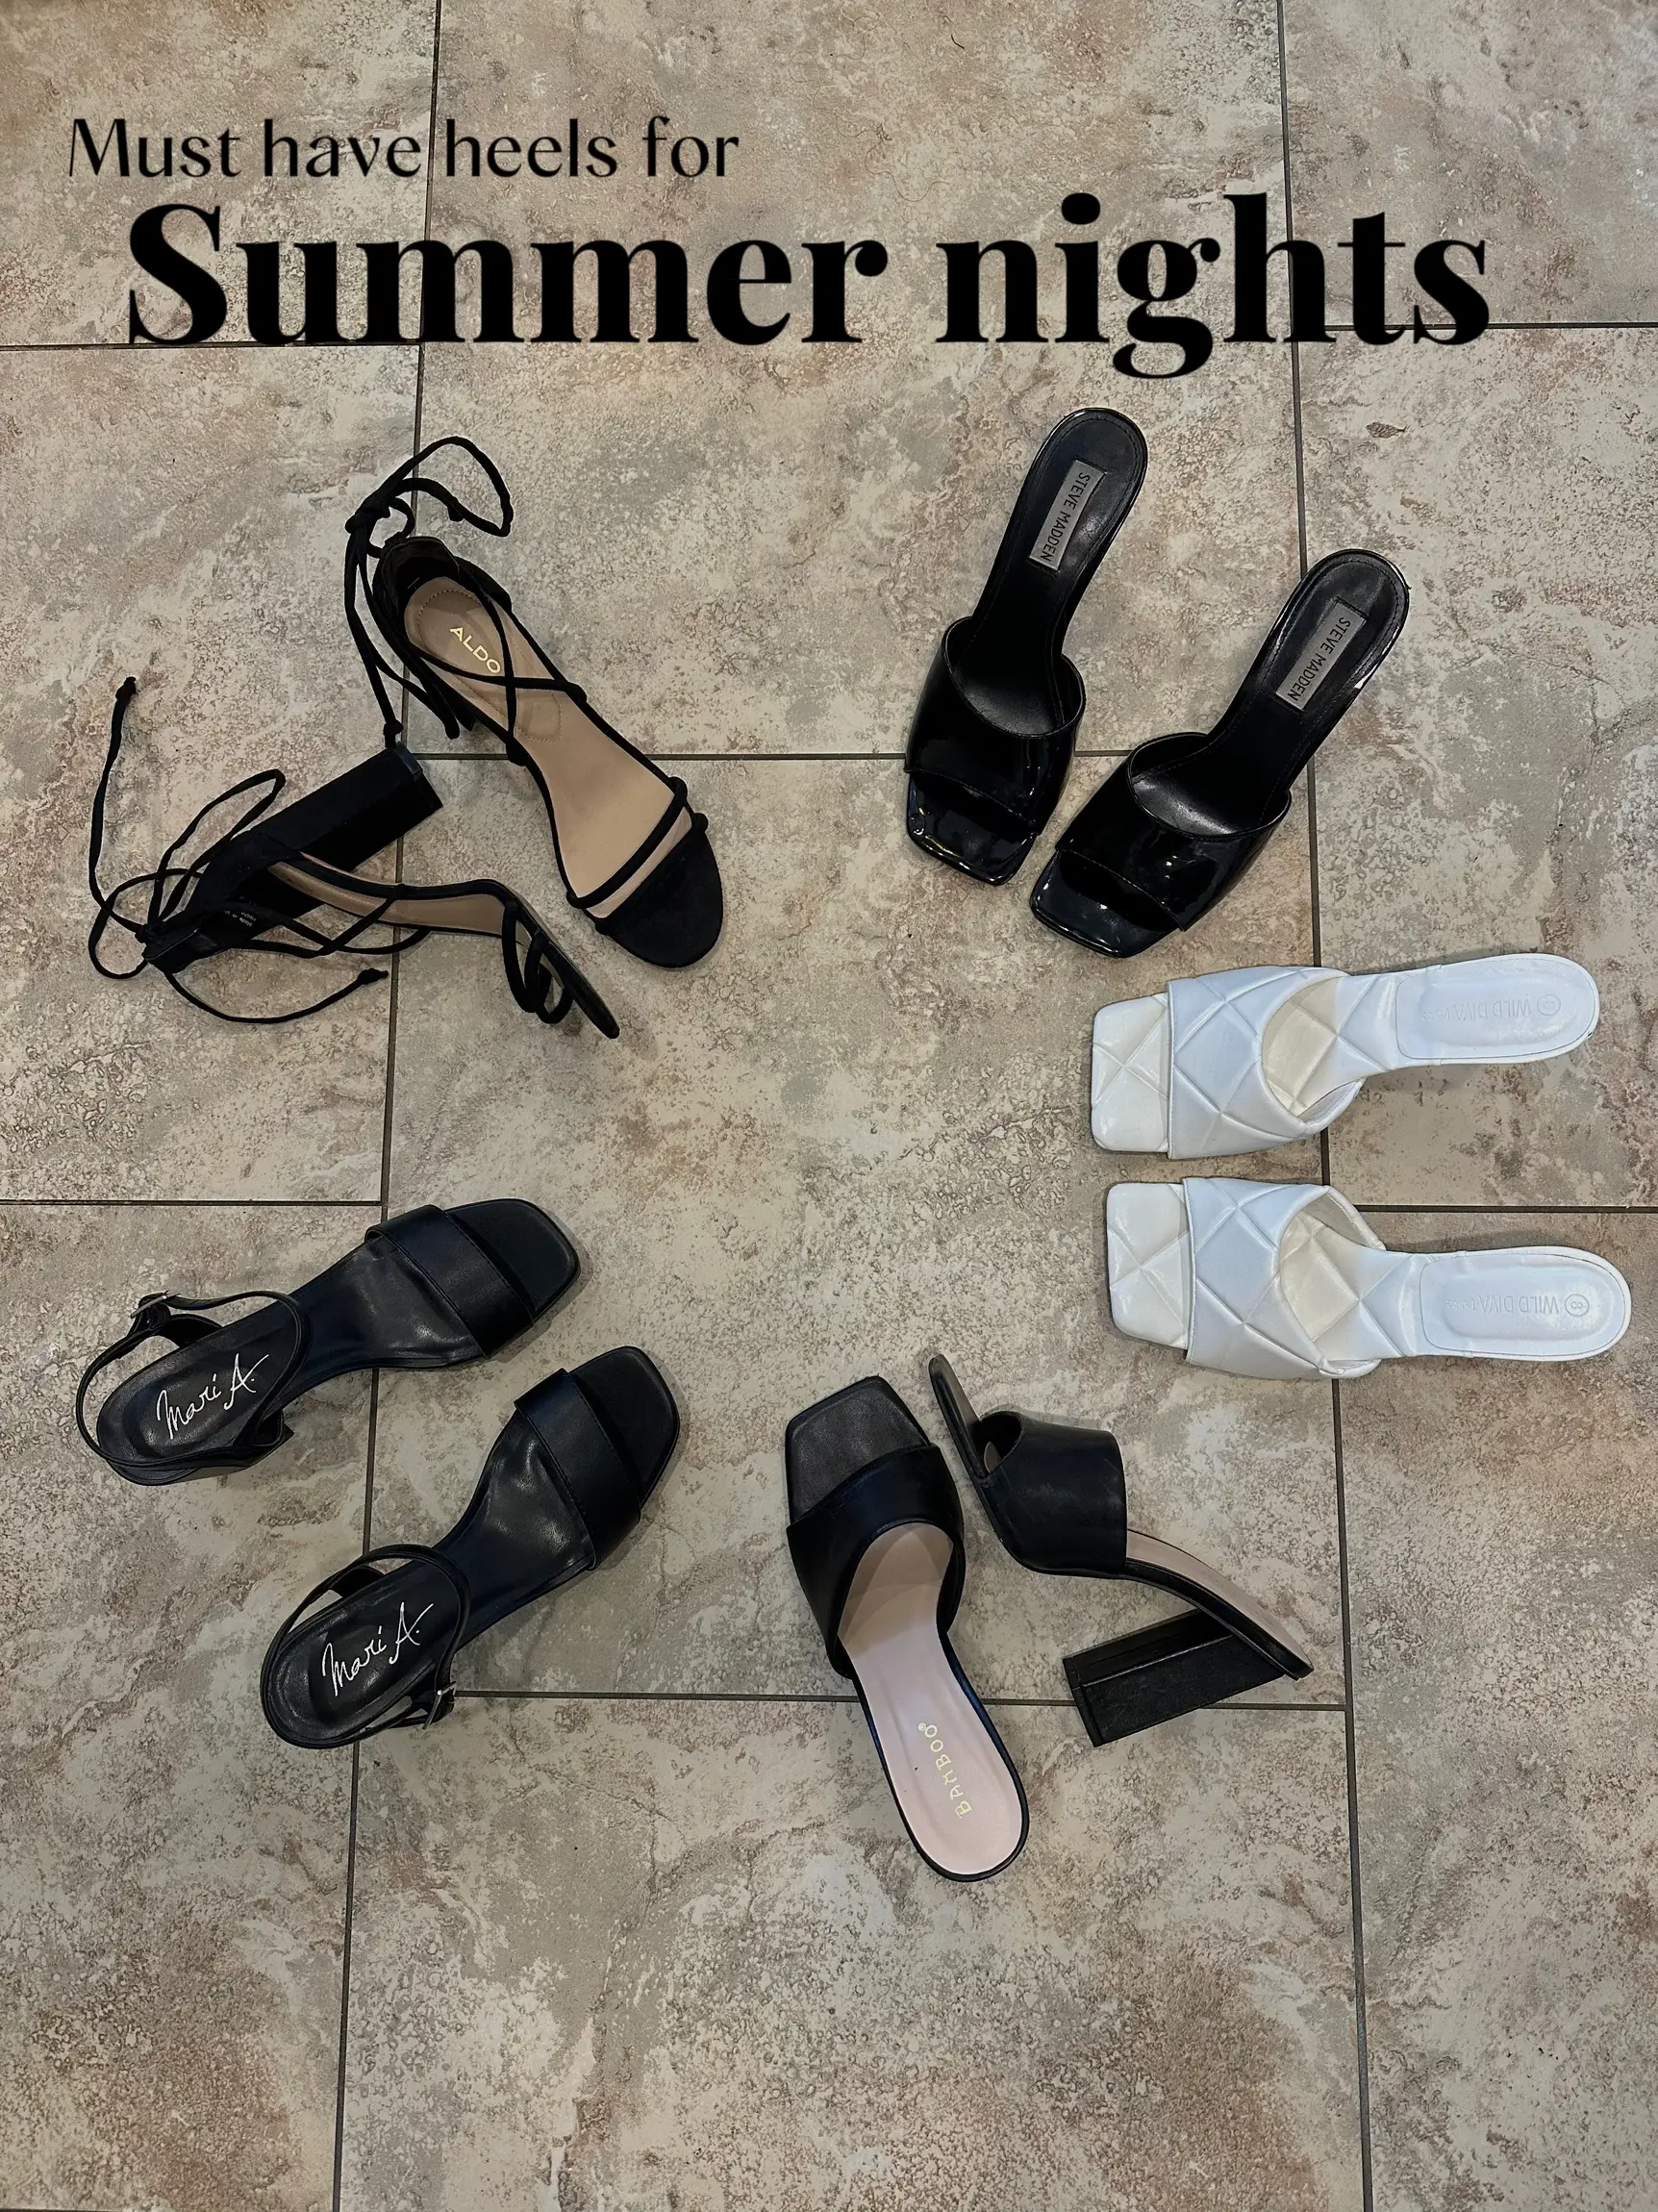 Girls Night Out Must Haves 2019